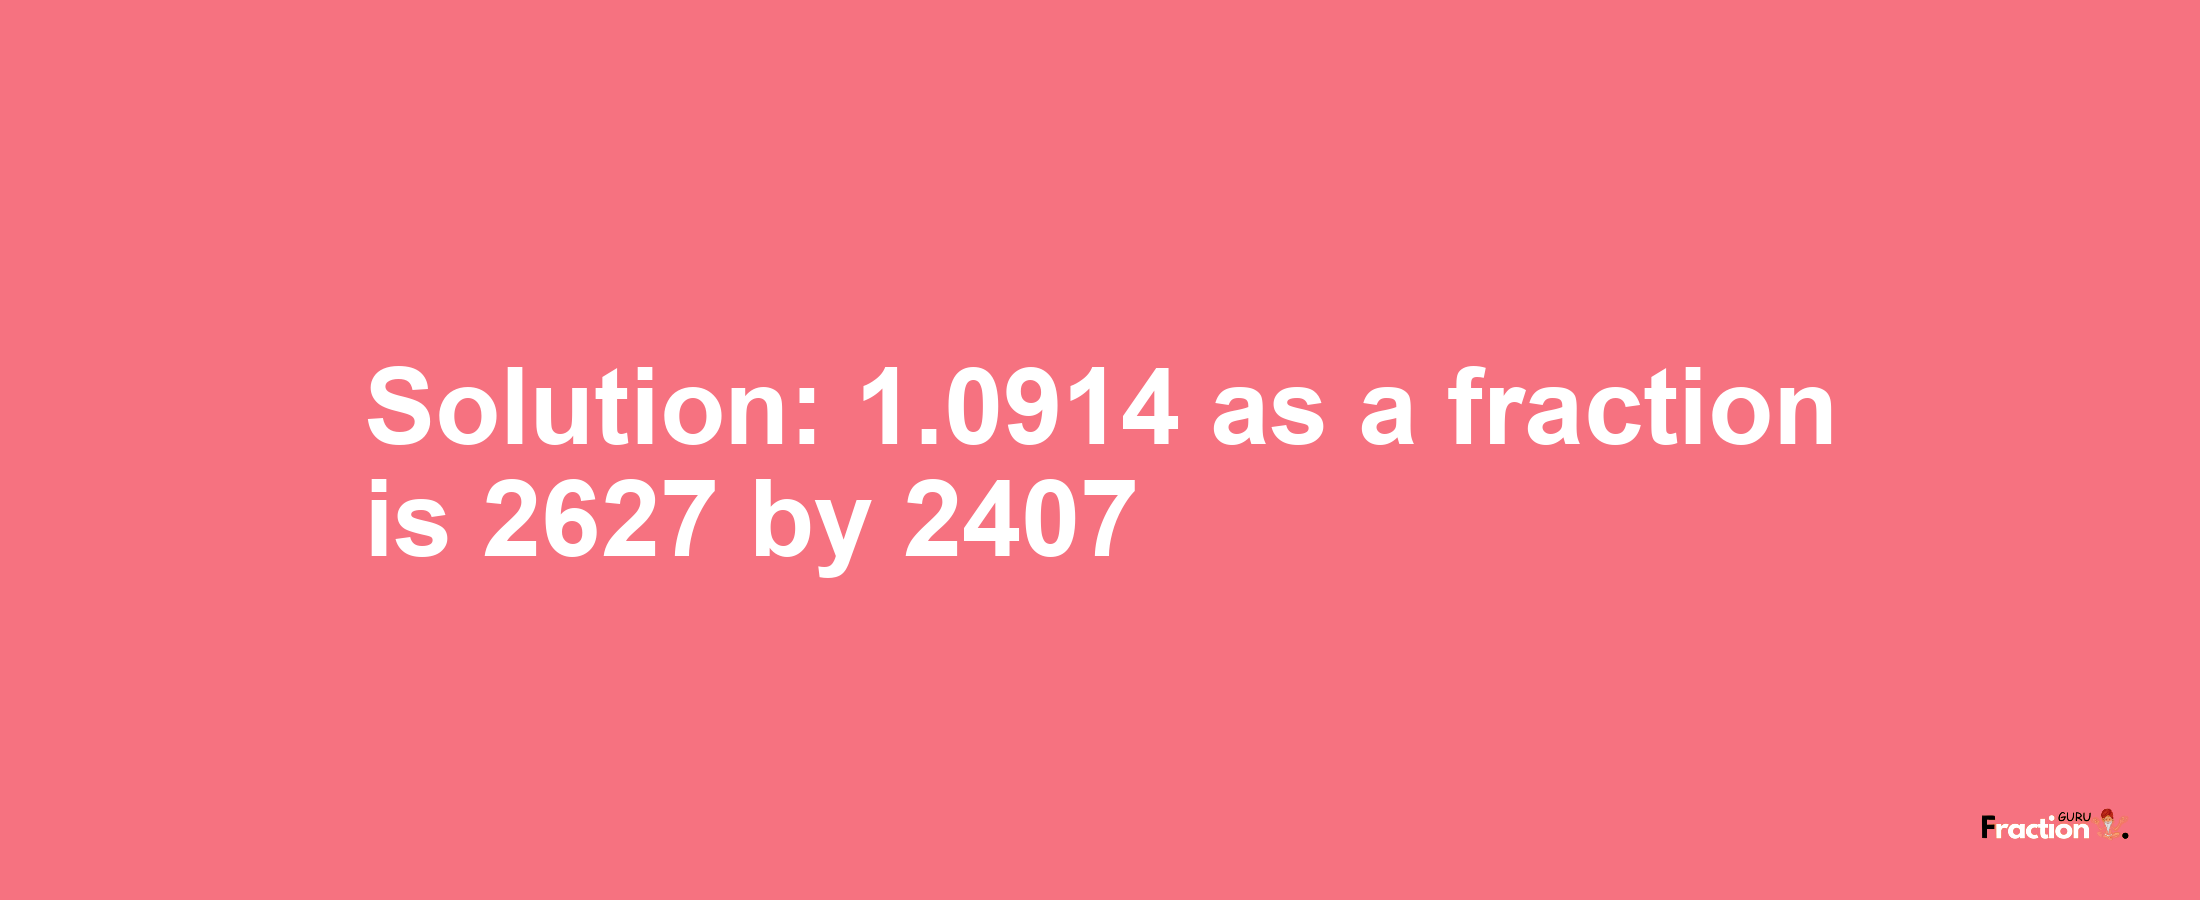 Solution:1.0914 as a fraction is 2627/2407